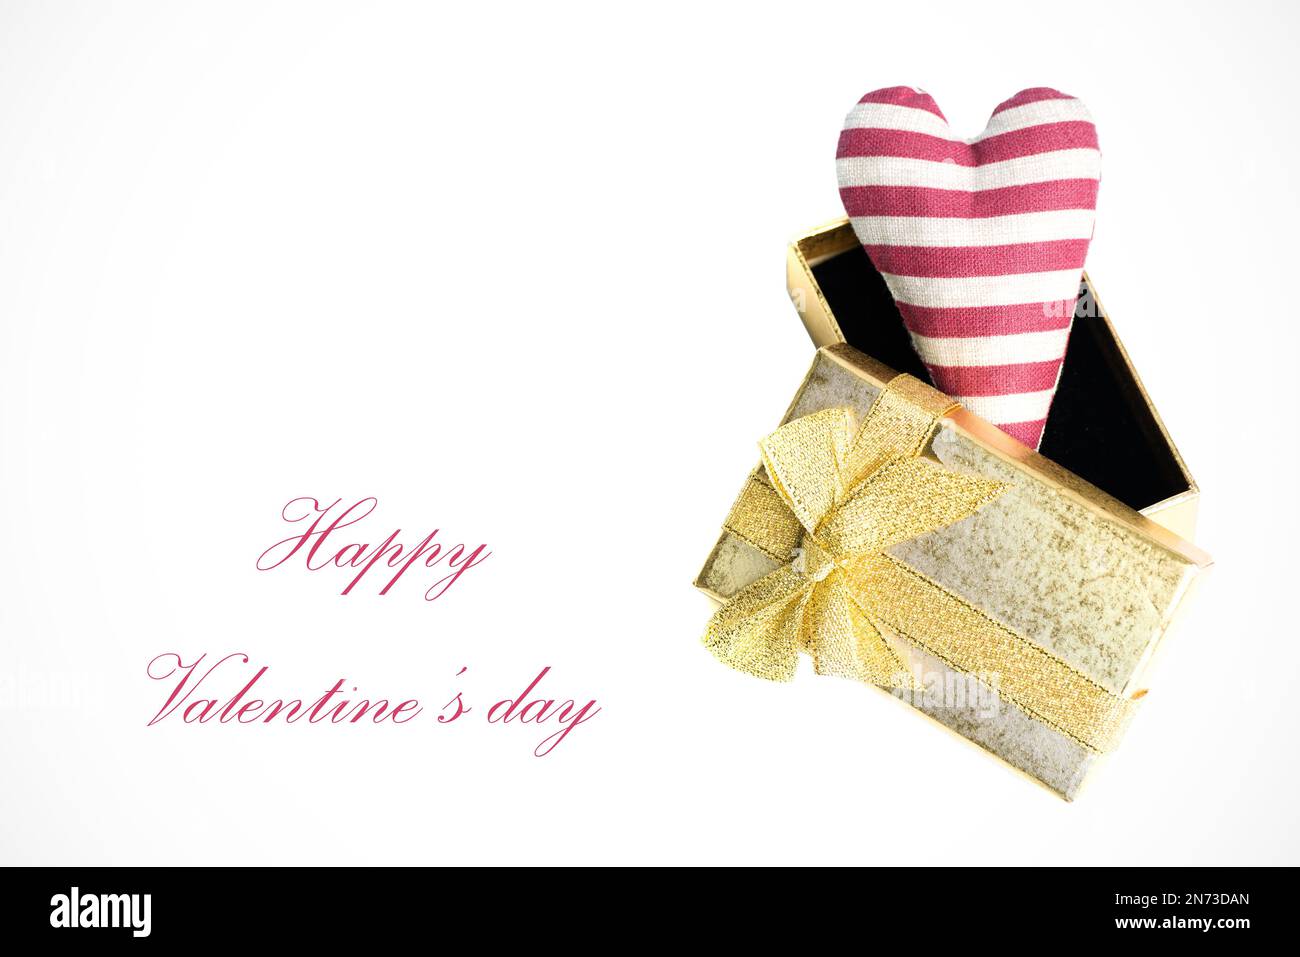 Valentine's day card - Golden gift box with red striped heart inside on white background with vignette Stock Photo